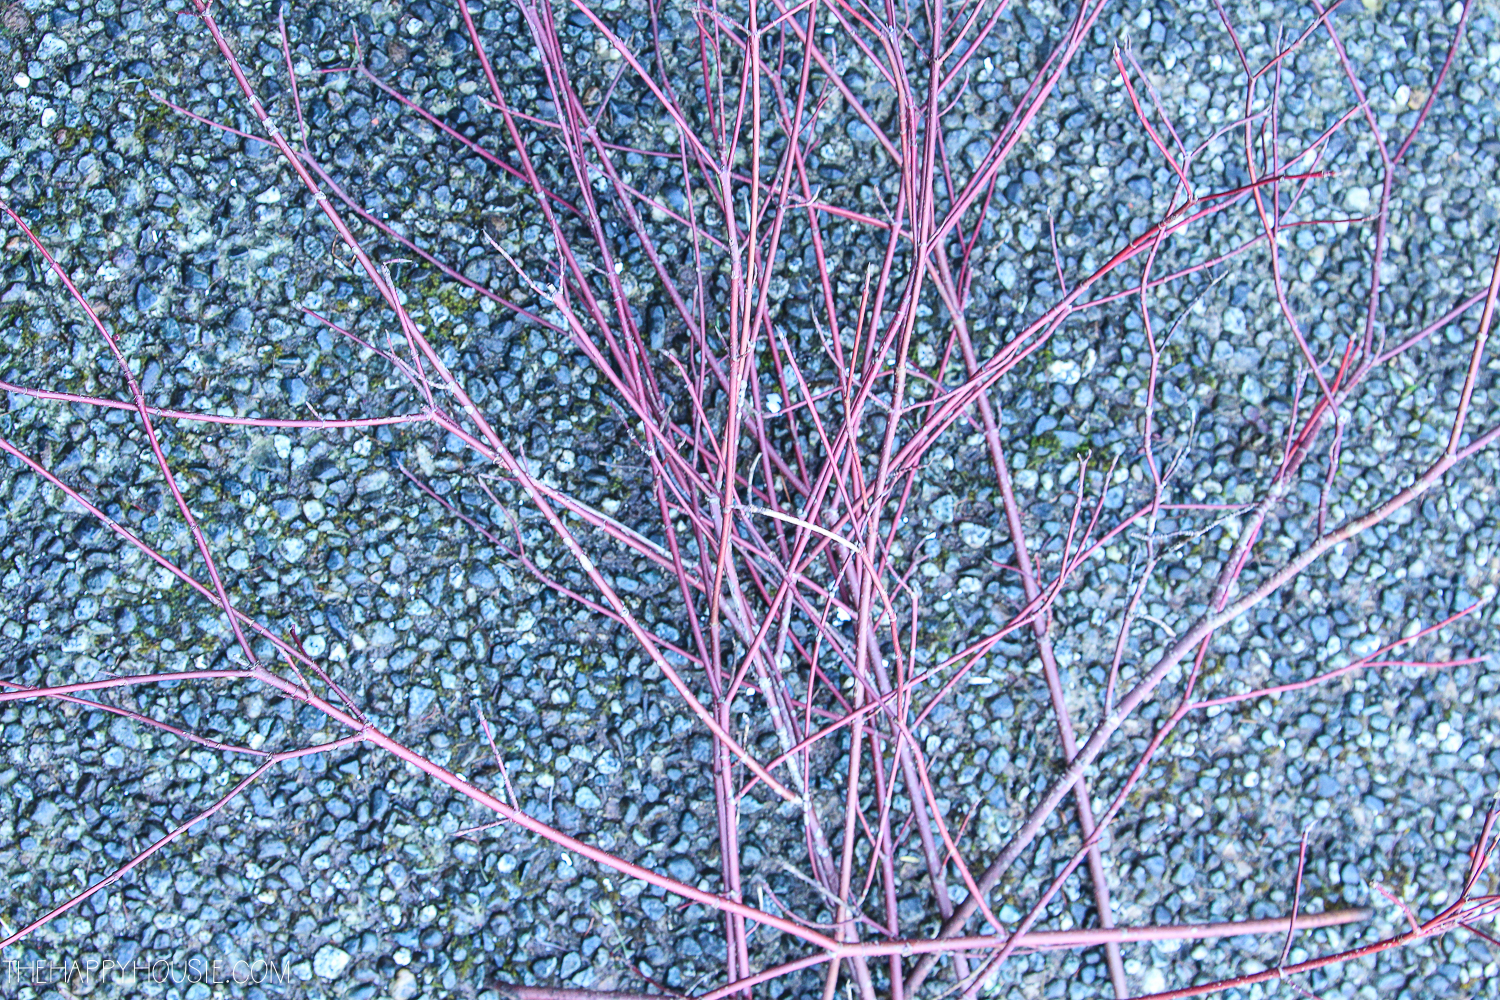 Pussy willow stems on the ground.